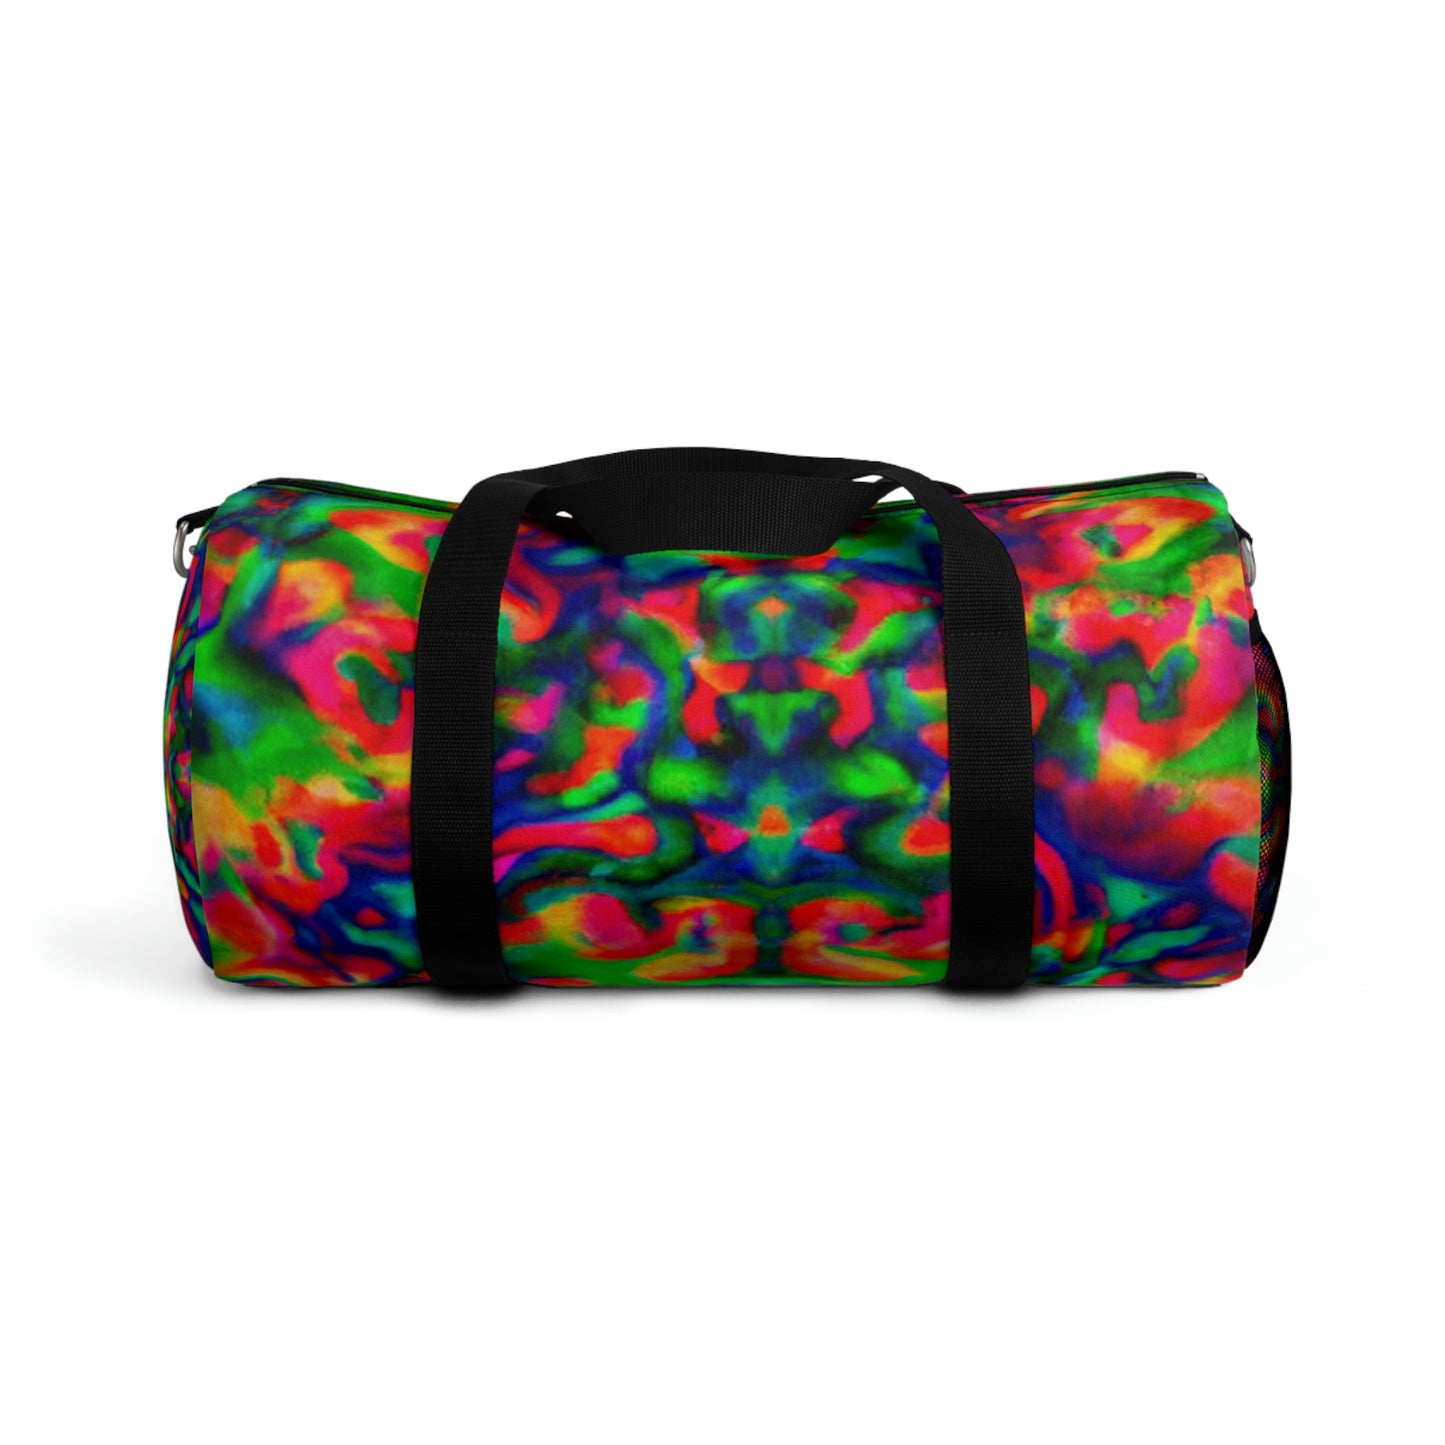 Valentino - Psychedelic Duffel Bag